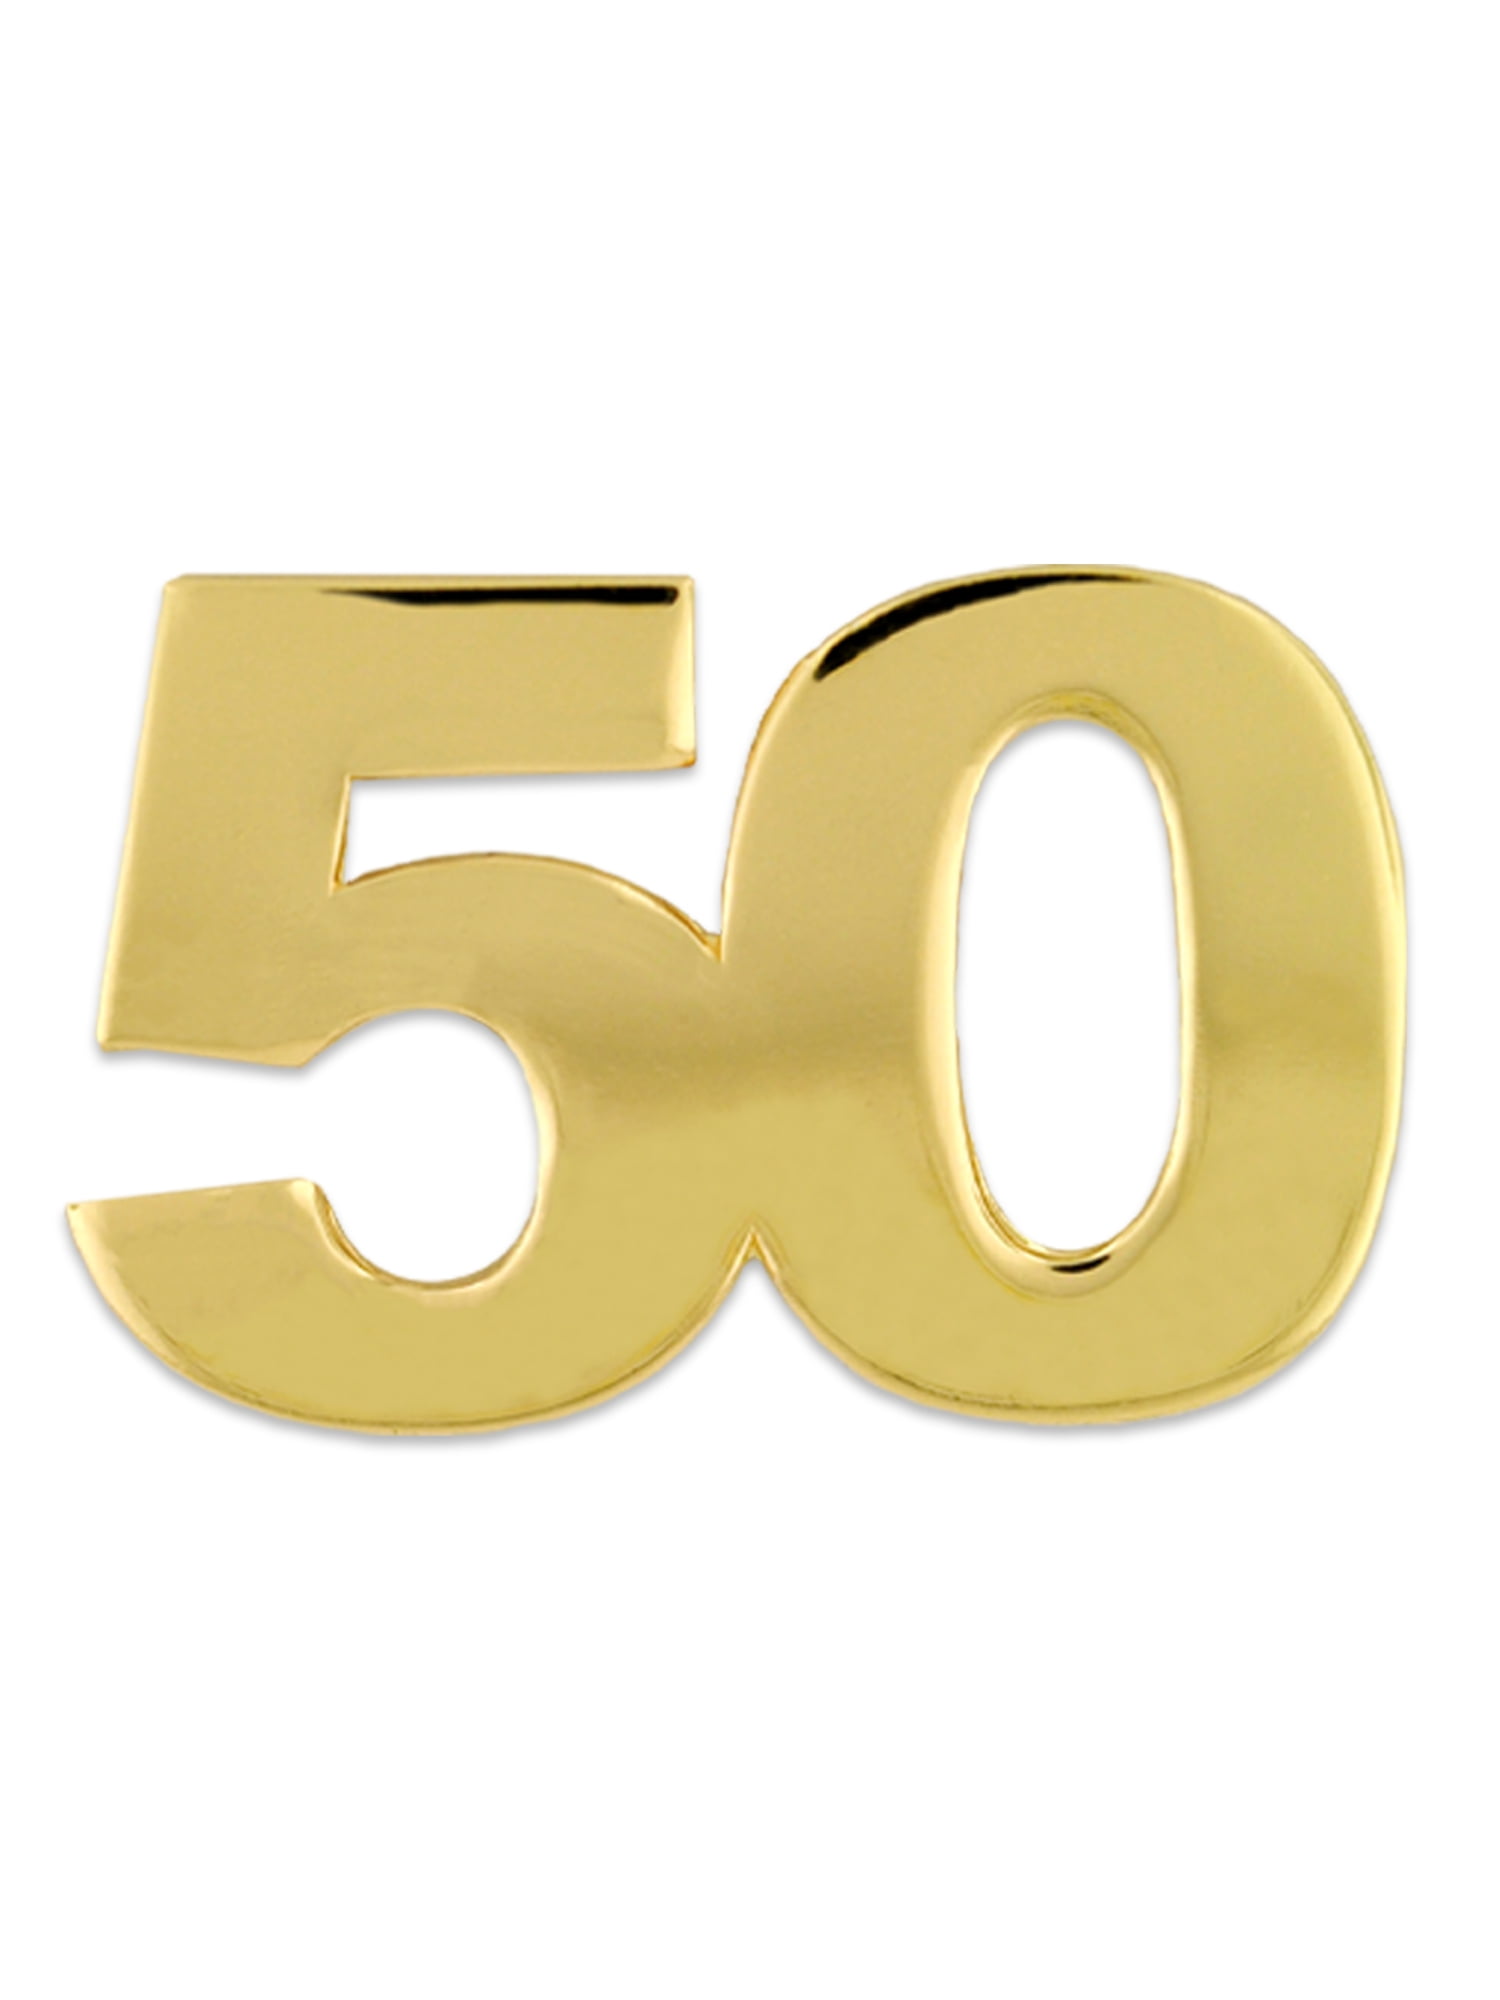 Pinmarts Number Fifty 50 Anniversary 50th Birthday Shiny Gold Lapel